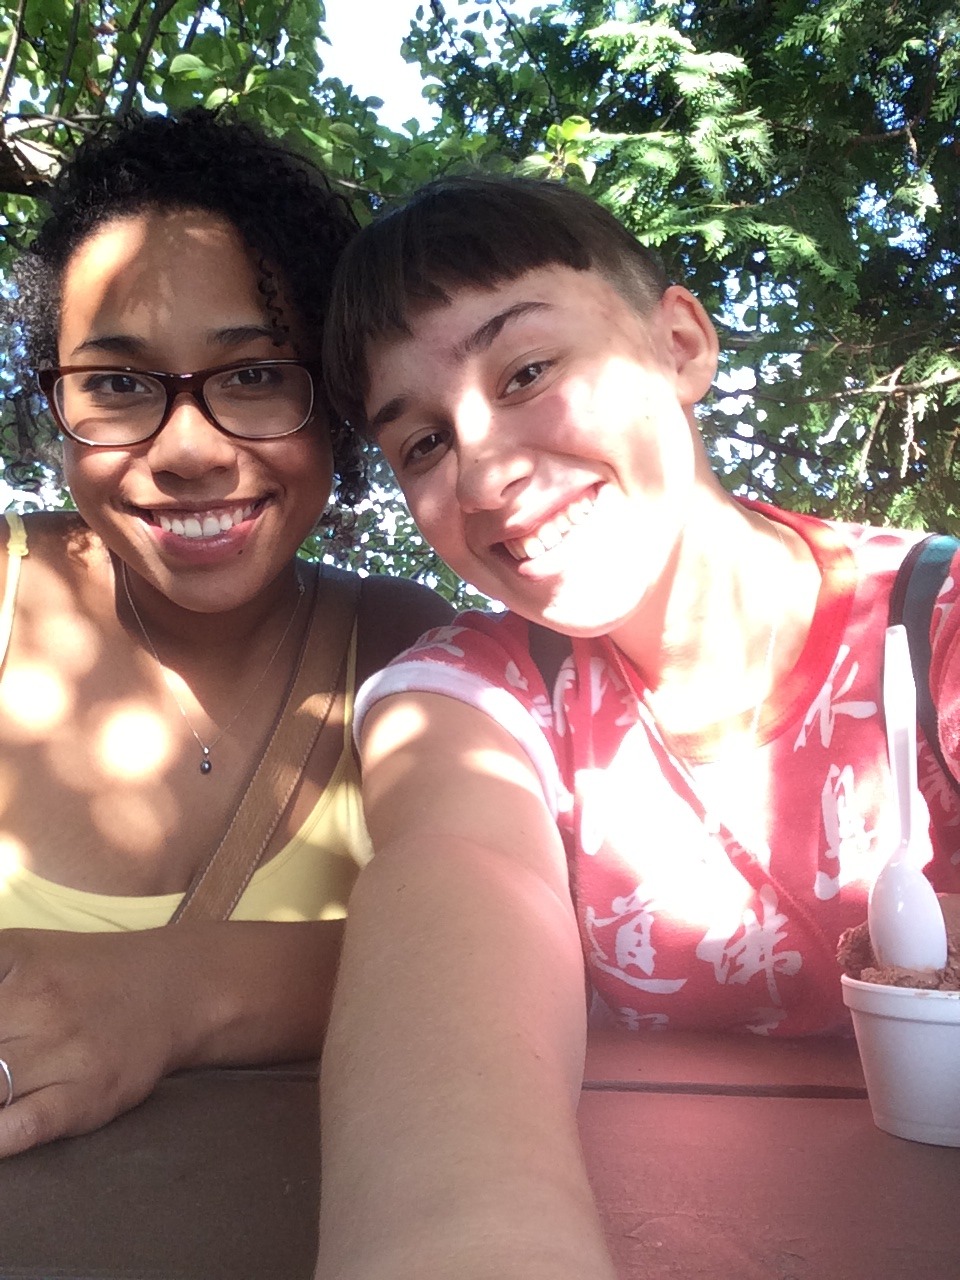 i am in a terrible mood so here is a pic of amaka &amp; i from last summer. i